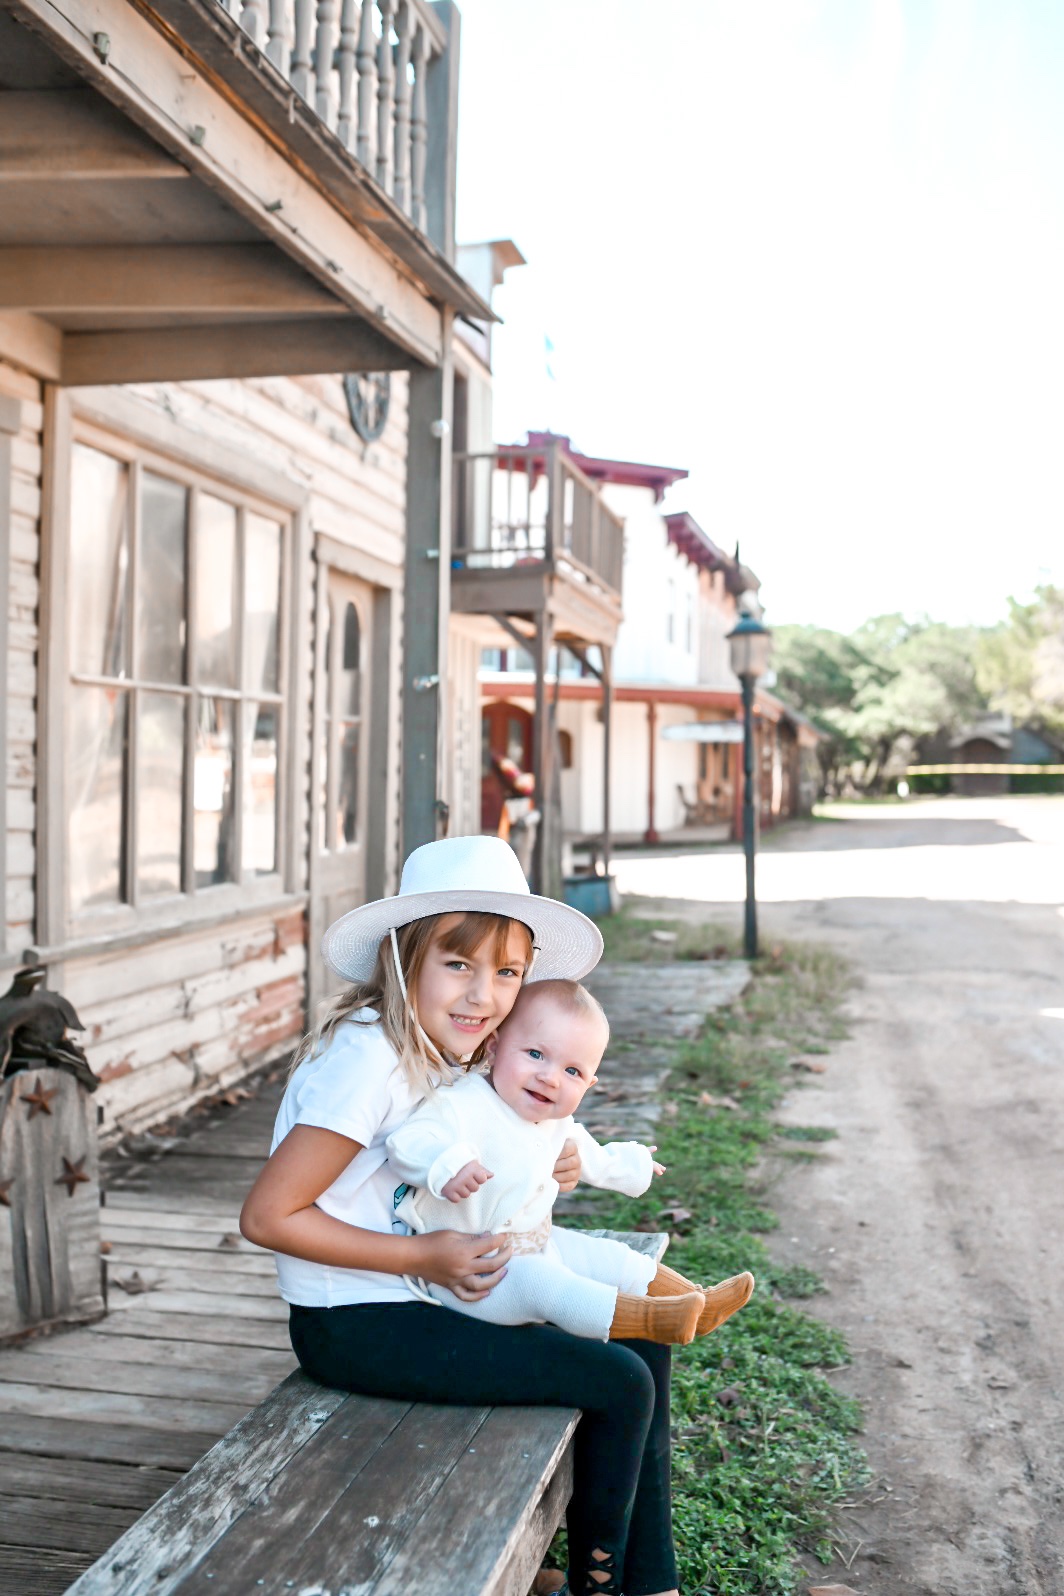 Daycation Idea - Road Trip to Pioneer Town in Wimberley